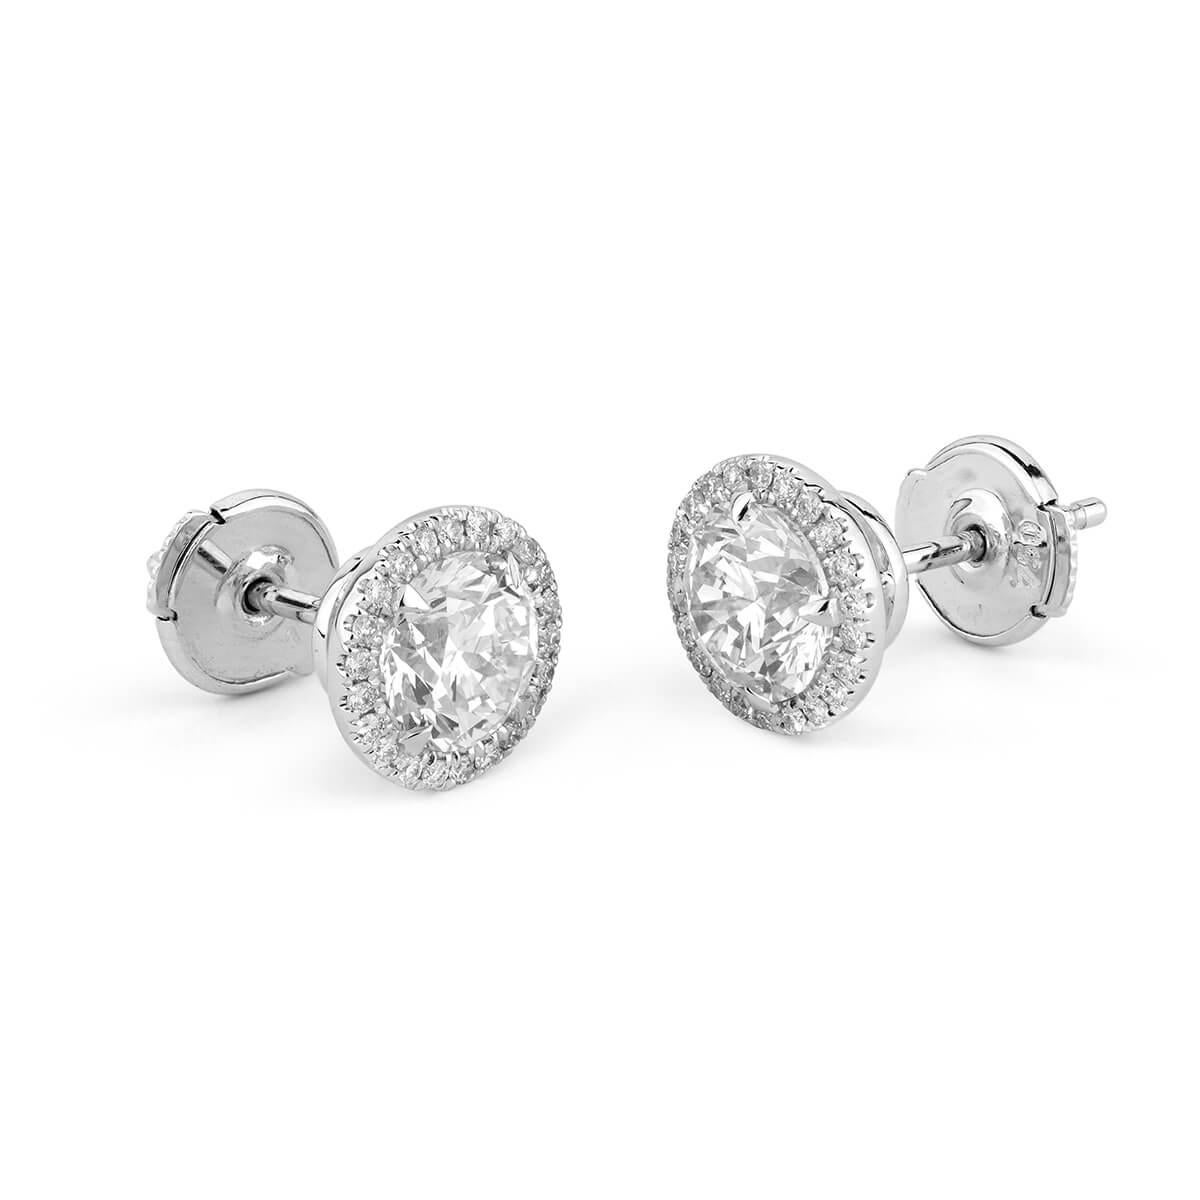 1.58 Carat VVS2 Natural White Round Diamond 18 Karat White Gold Stud Earrings In New Condition For Sale In London, GB